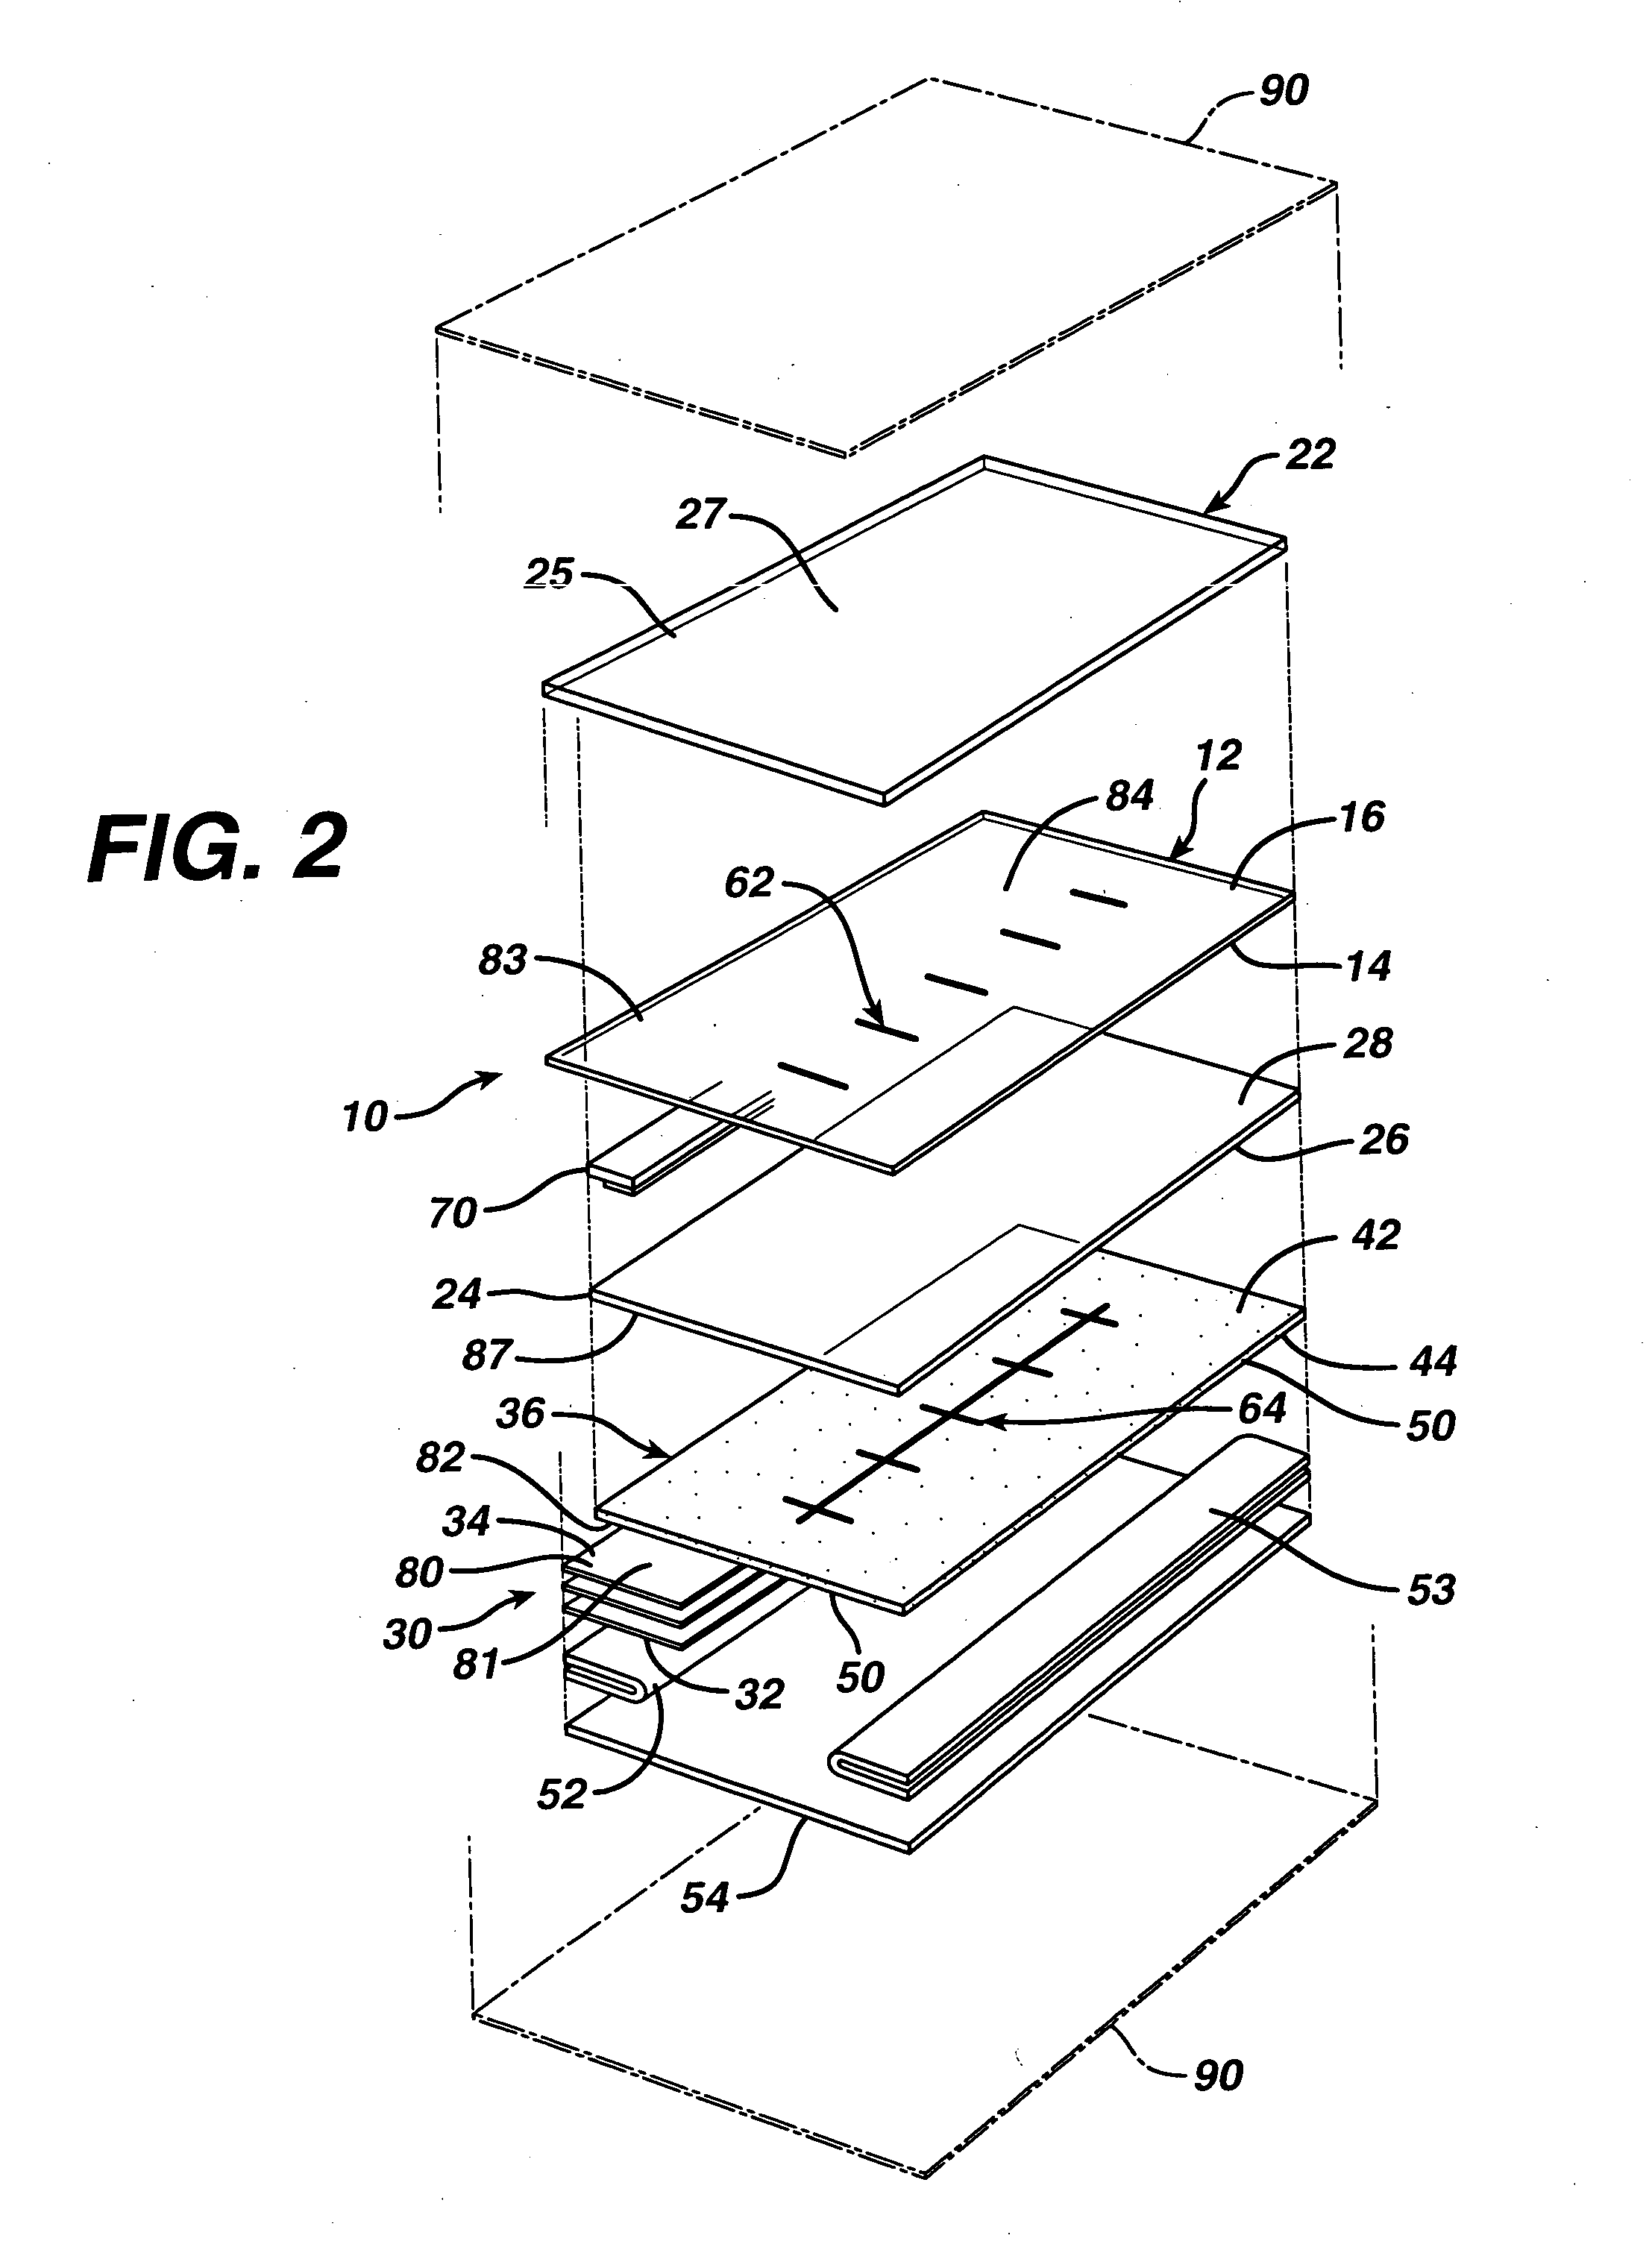 Surgical wound closure device